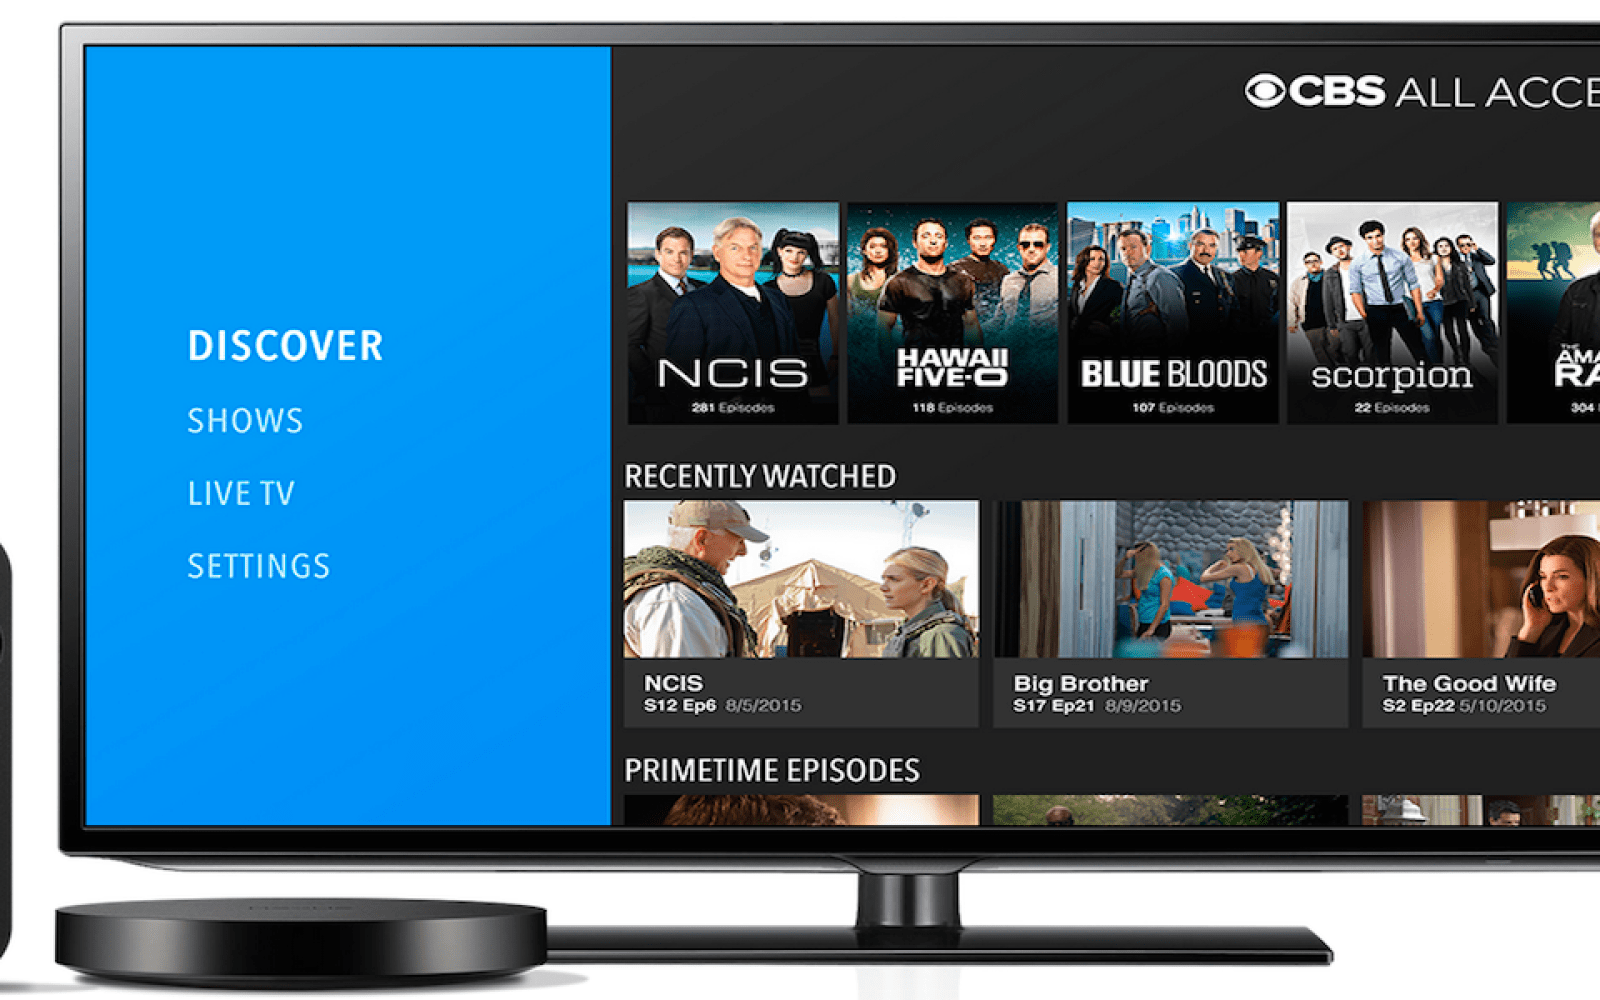 CBS All Access content is now available on Android TV